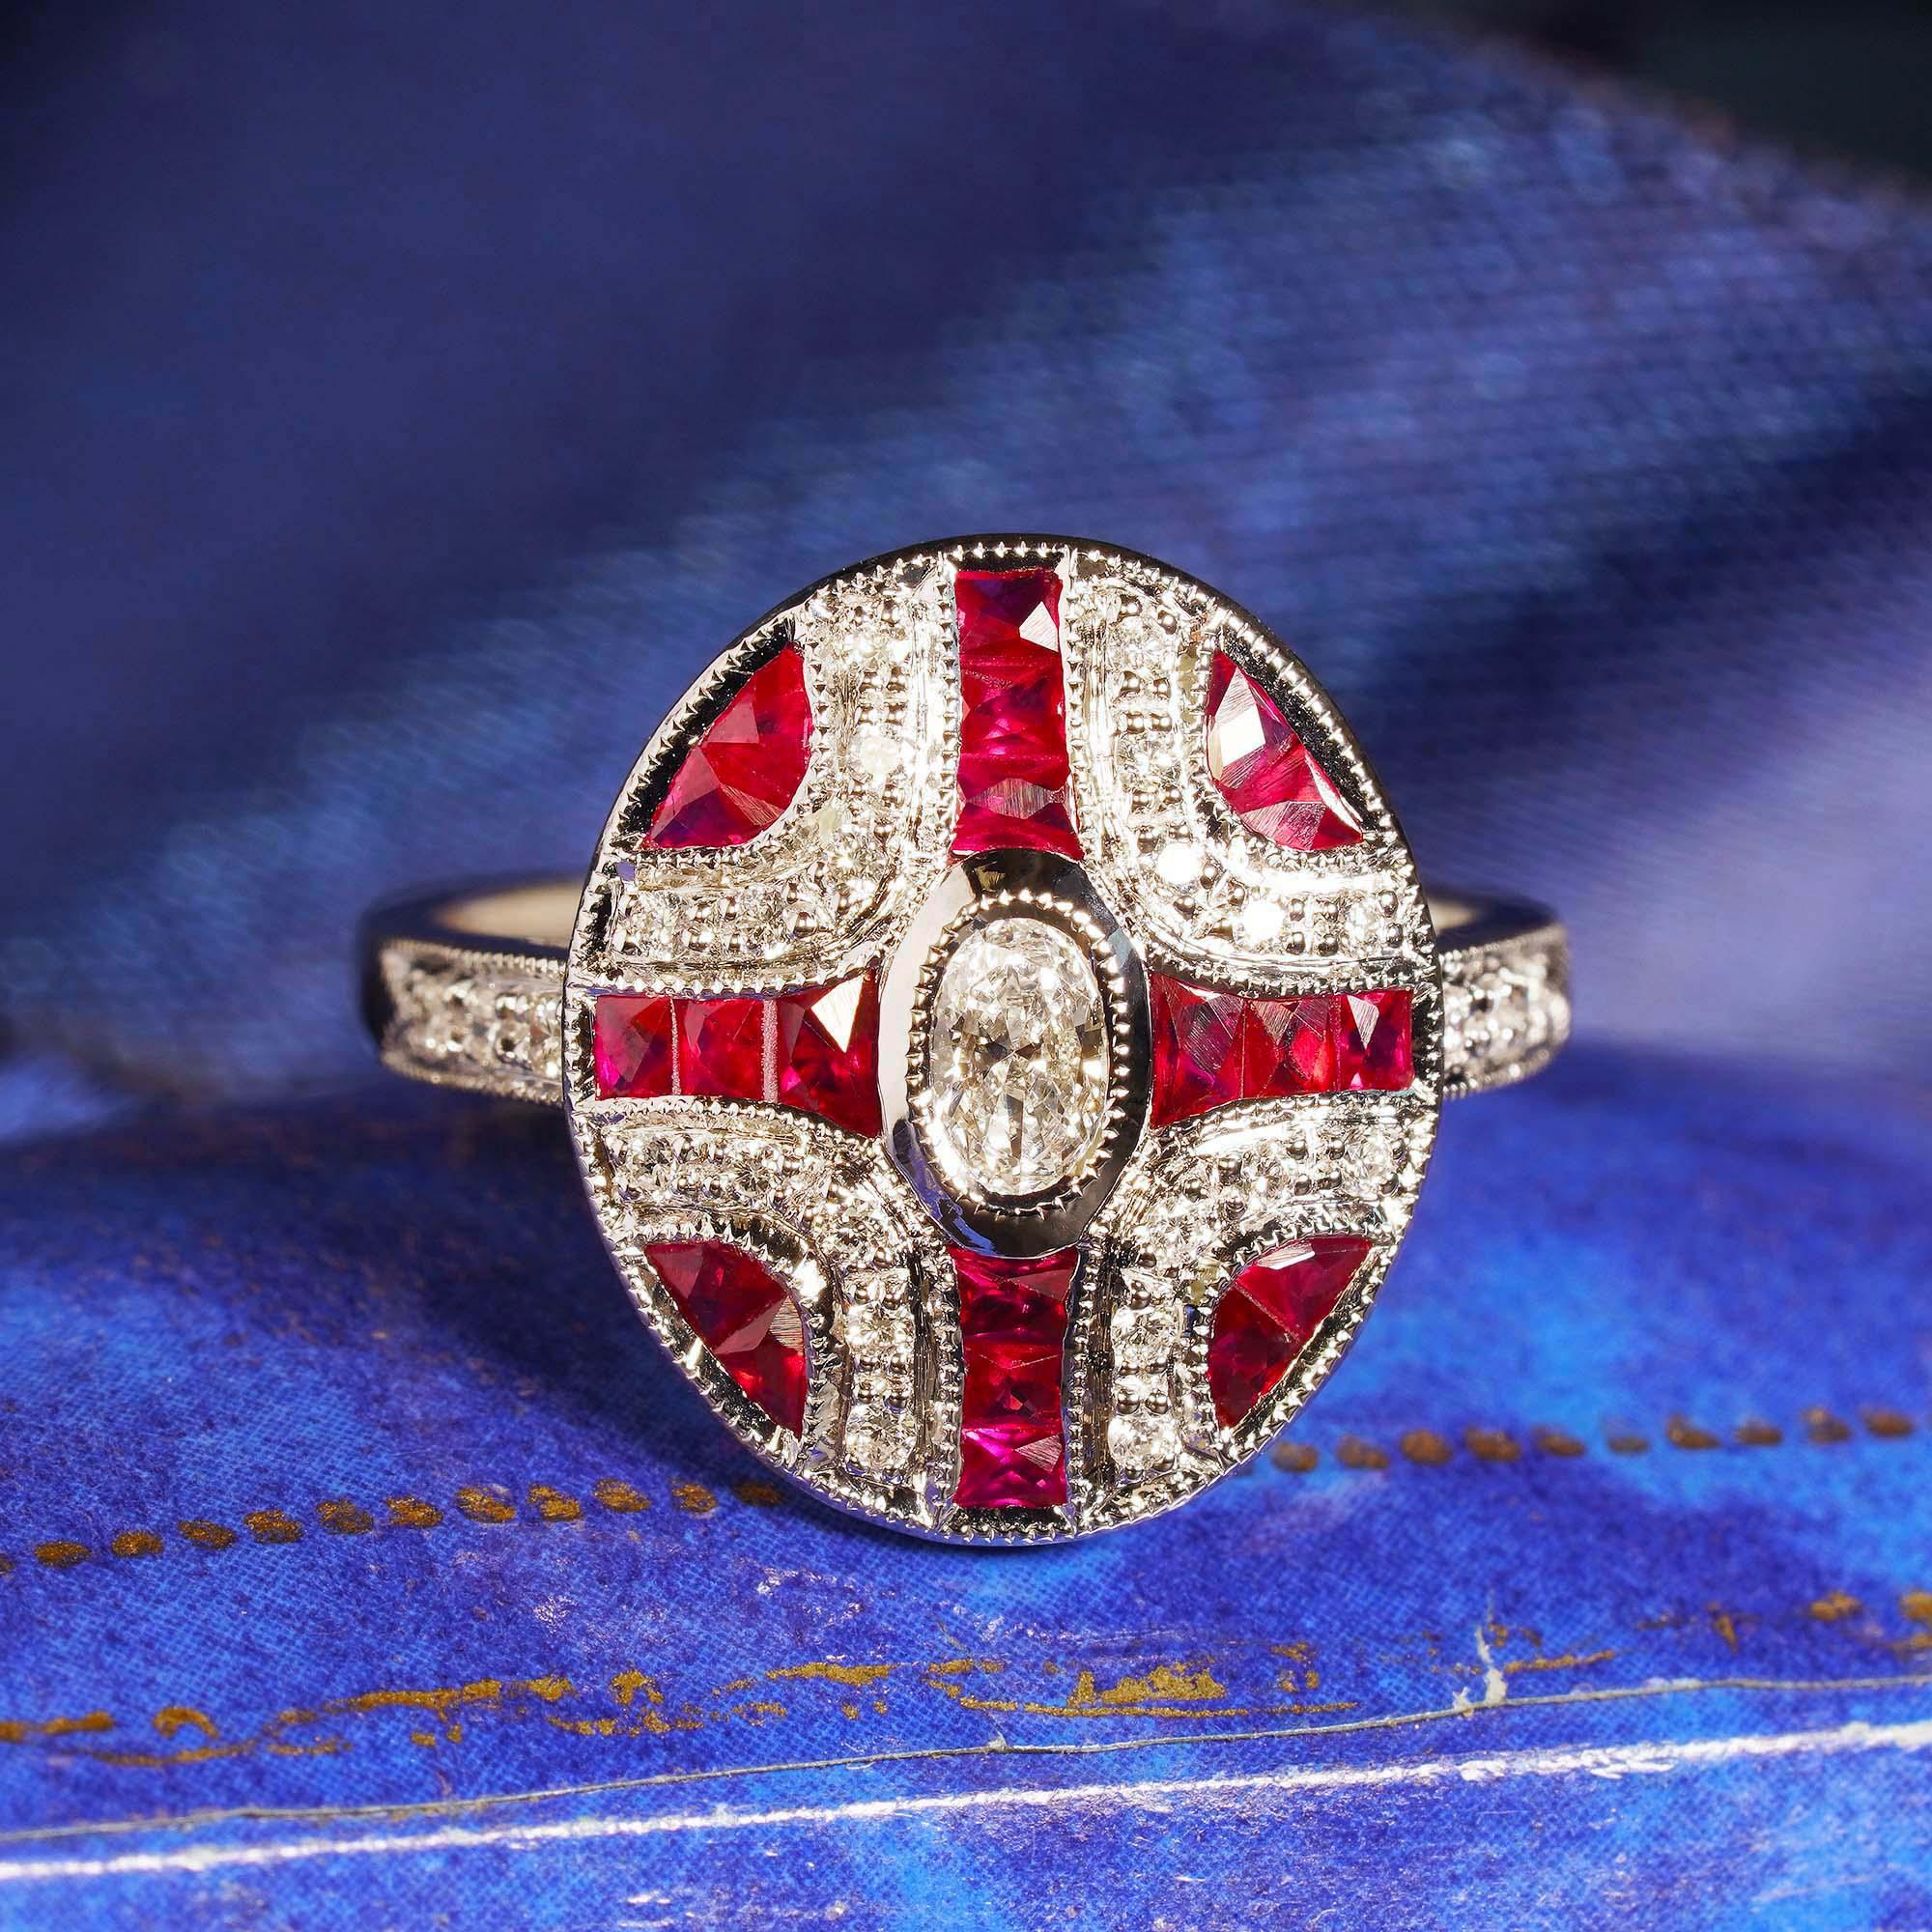 This is a lovely Art Deco style diamond and ruby 14k white gold ring. The ring is set with charming oval cut diamond that weights approximately 0.17 carat. The center stone is accentuated by gorgeous faceted French cut rubies and sparkling round cut